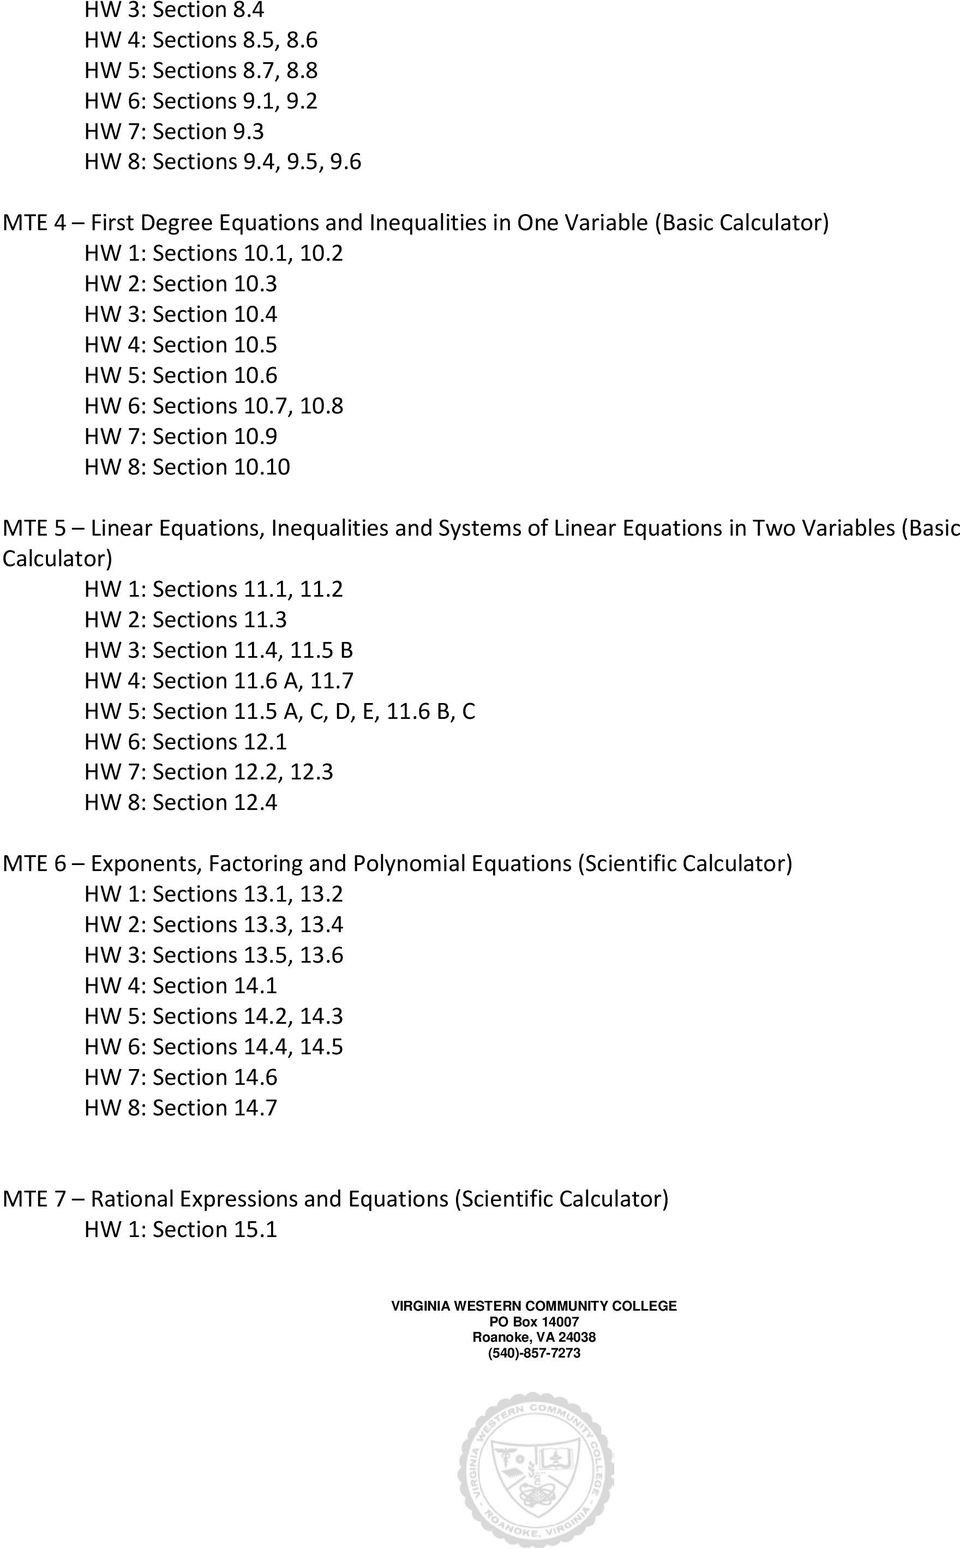 6 HW 6: Sections 10.7, 10.8 HW 7: Section 10.9 HW 8: Section 10.10 MTE 5 Linear Equations, Inequalities and Systems of Linear Equations in Two Variables (Basic Calculator) HW 1: Sections 11.1, 11.